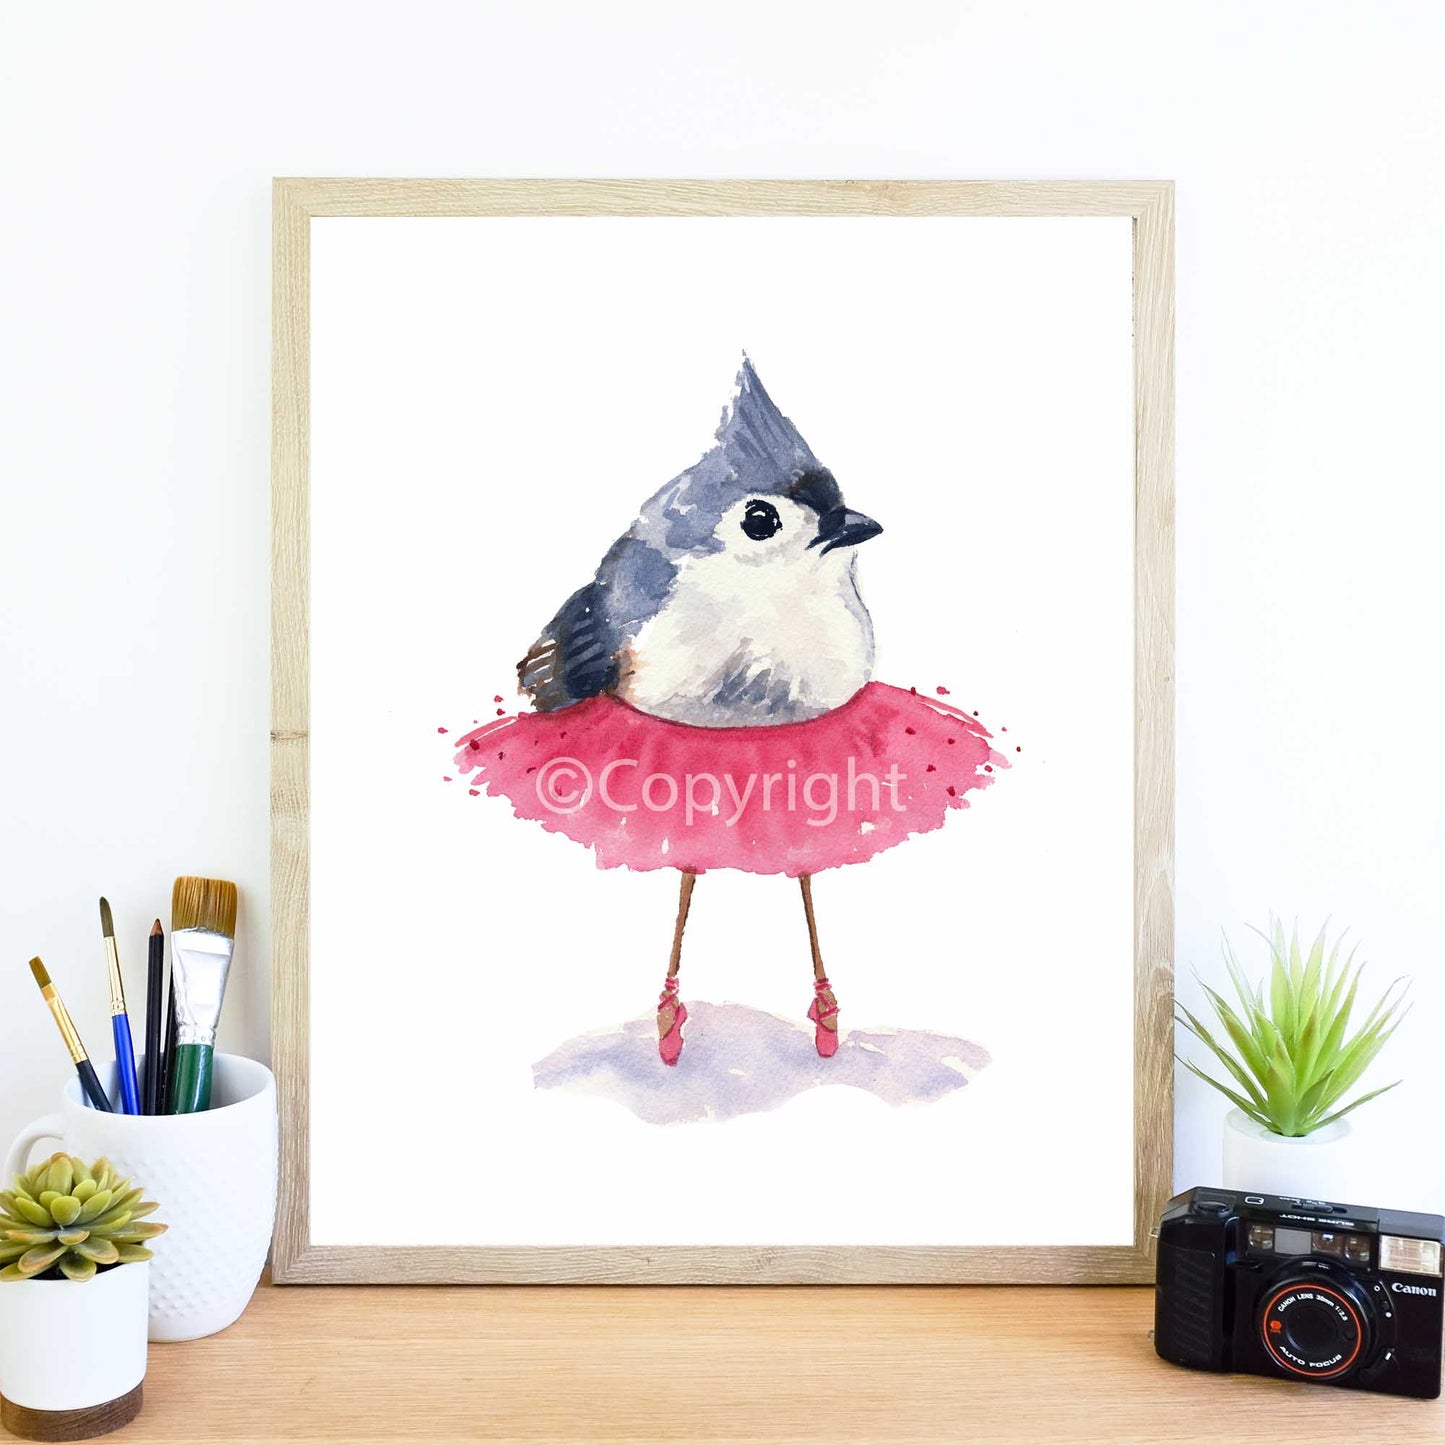 ballet birdie, tufted titmouse bird, pink tutu, pointe shoes, no 45 in series of ballet birds, three sizes available 5x7 8x10 11x14, signed and dated on back, printed with pigment ink on cotton rag paper, archival fine art, copyright Deidre Wicks